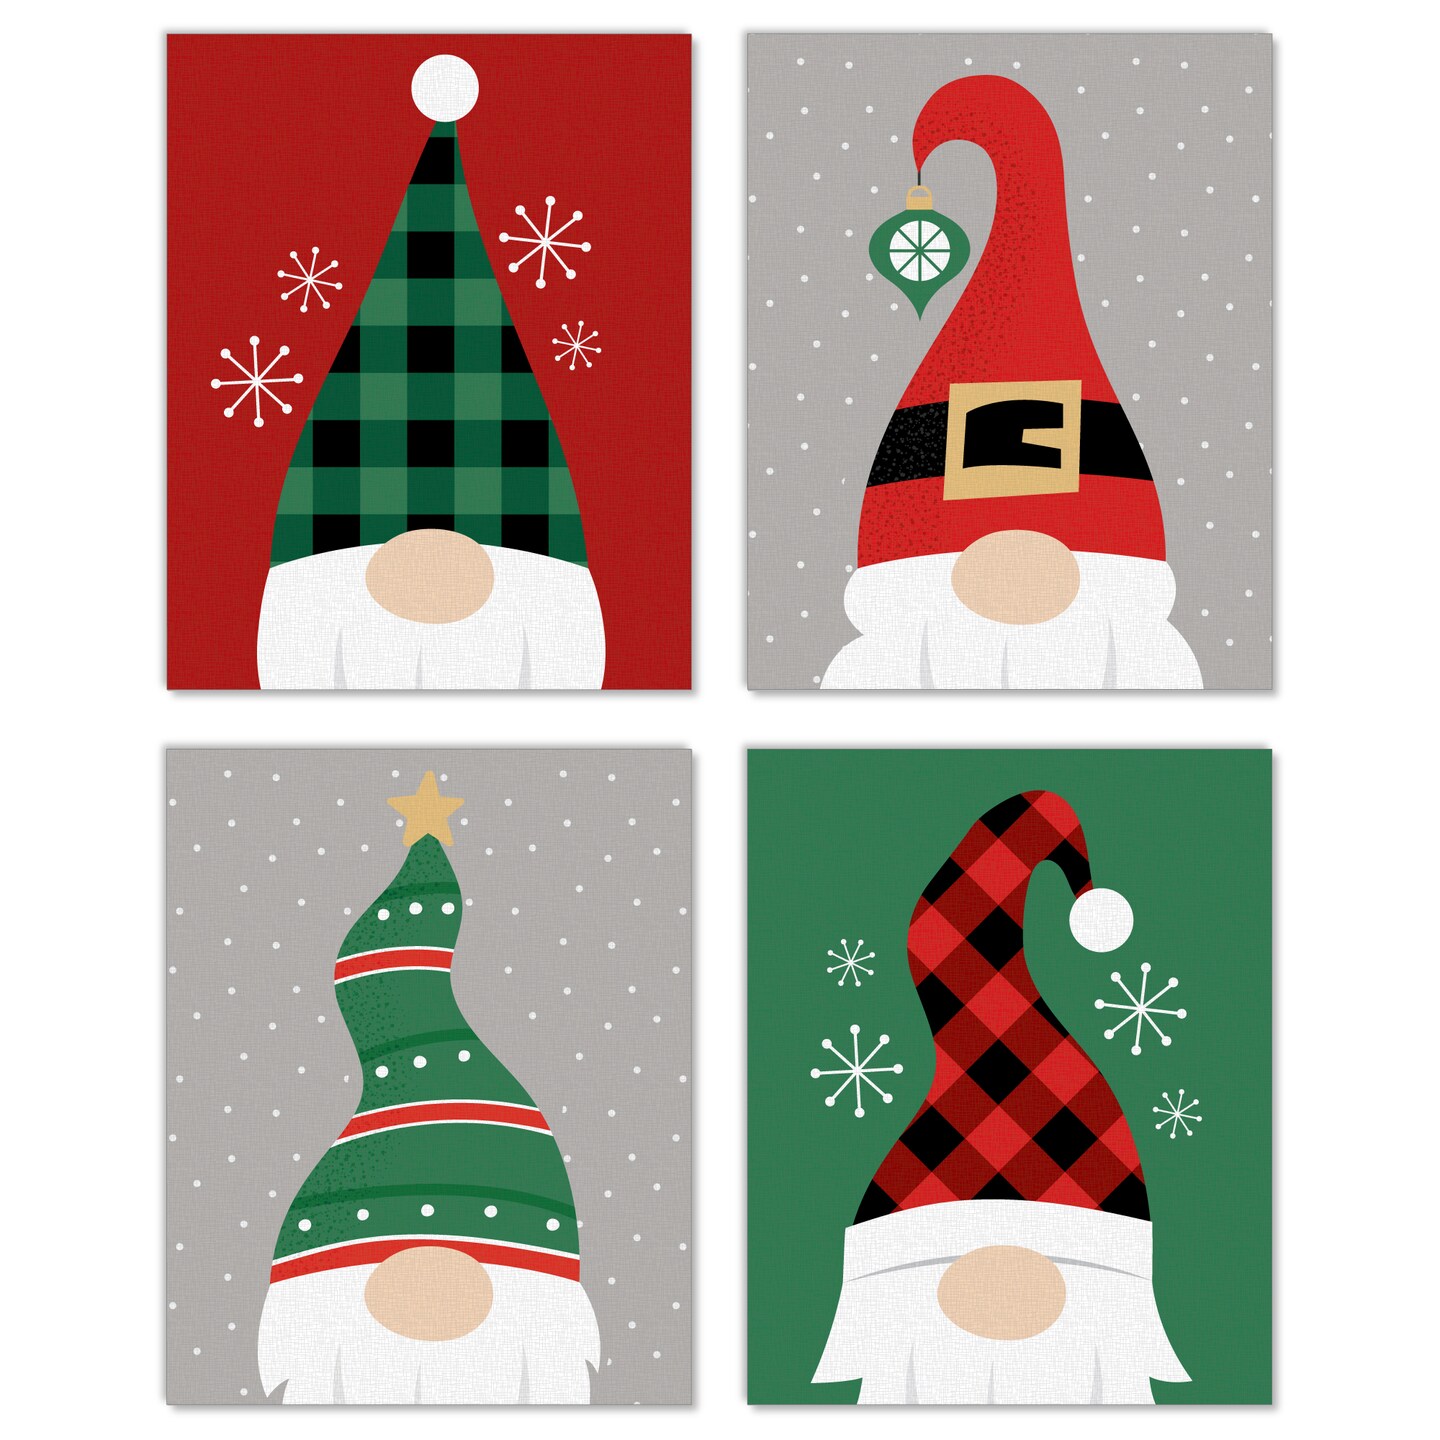 Big Dot of Happiness Red and Green Holiday Gnomes - Unframed Christmas Linen Paper Wall Art - Set of 4 - Artisms - 8 x 10 inches